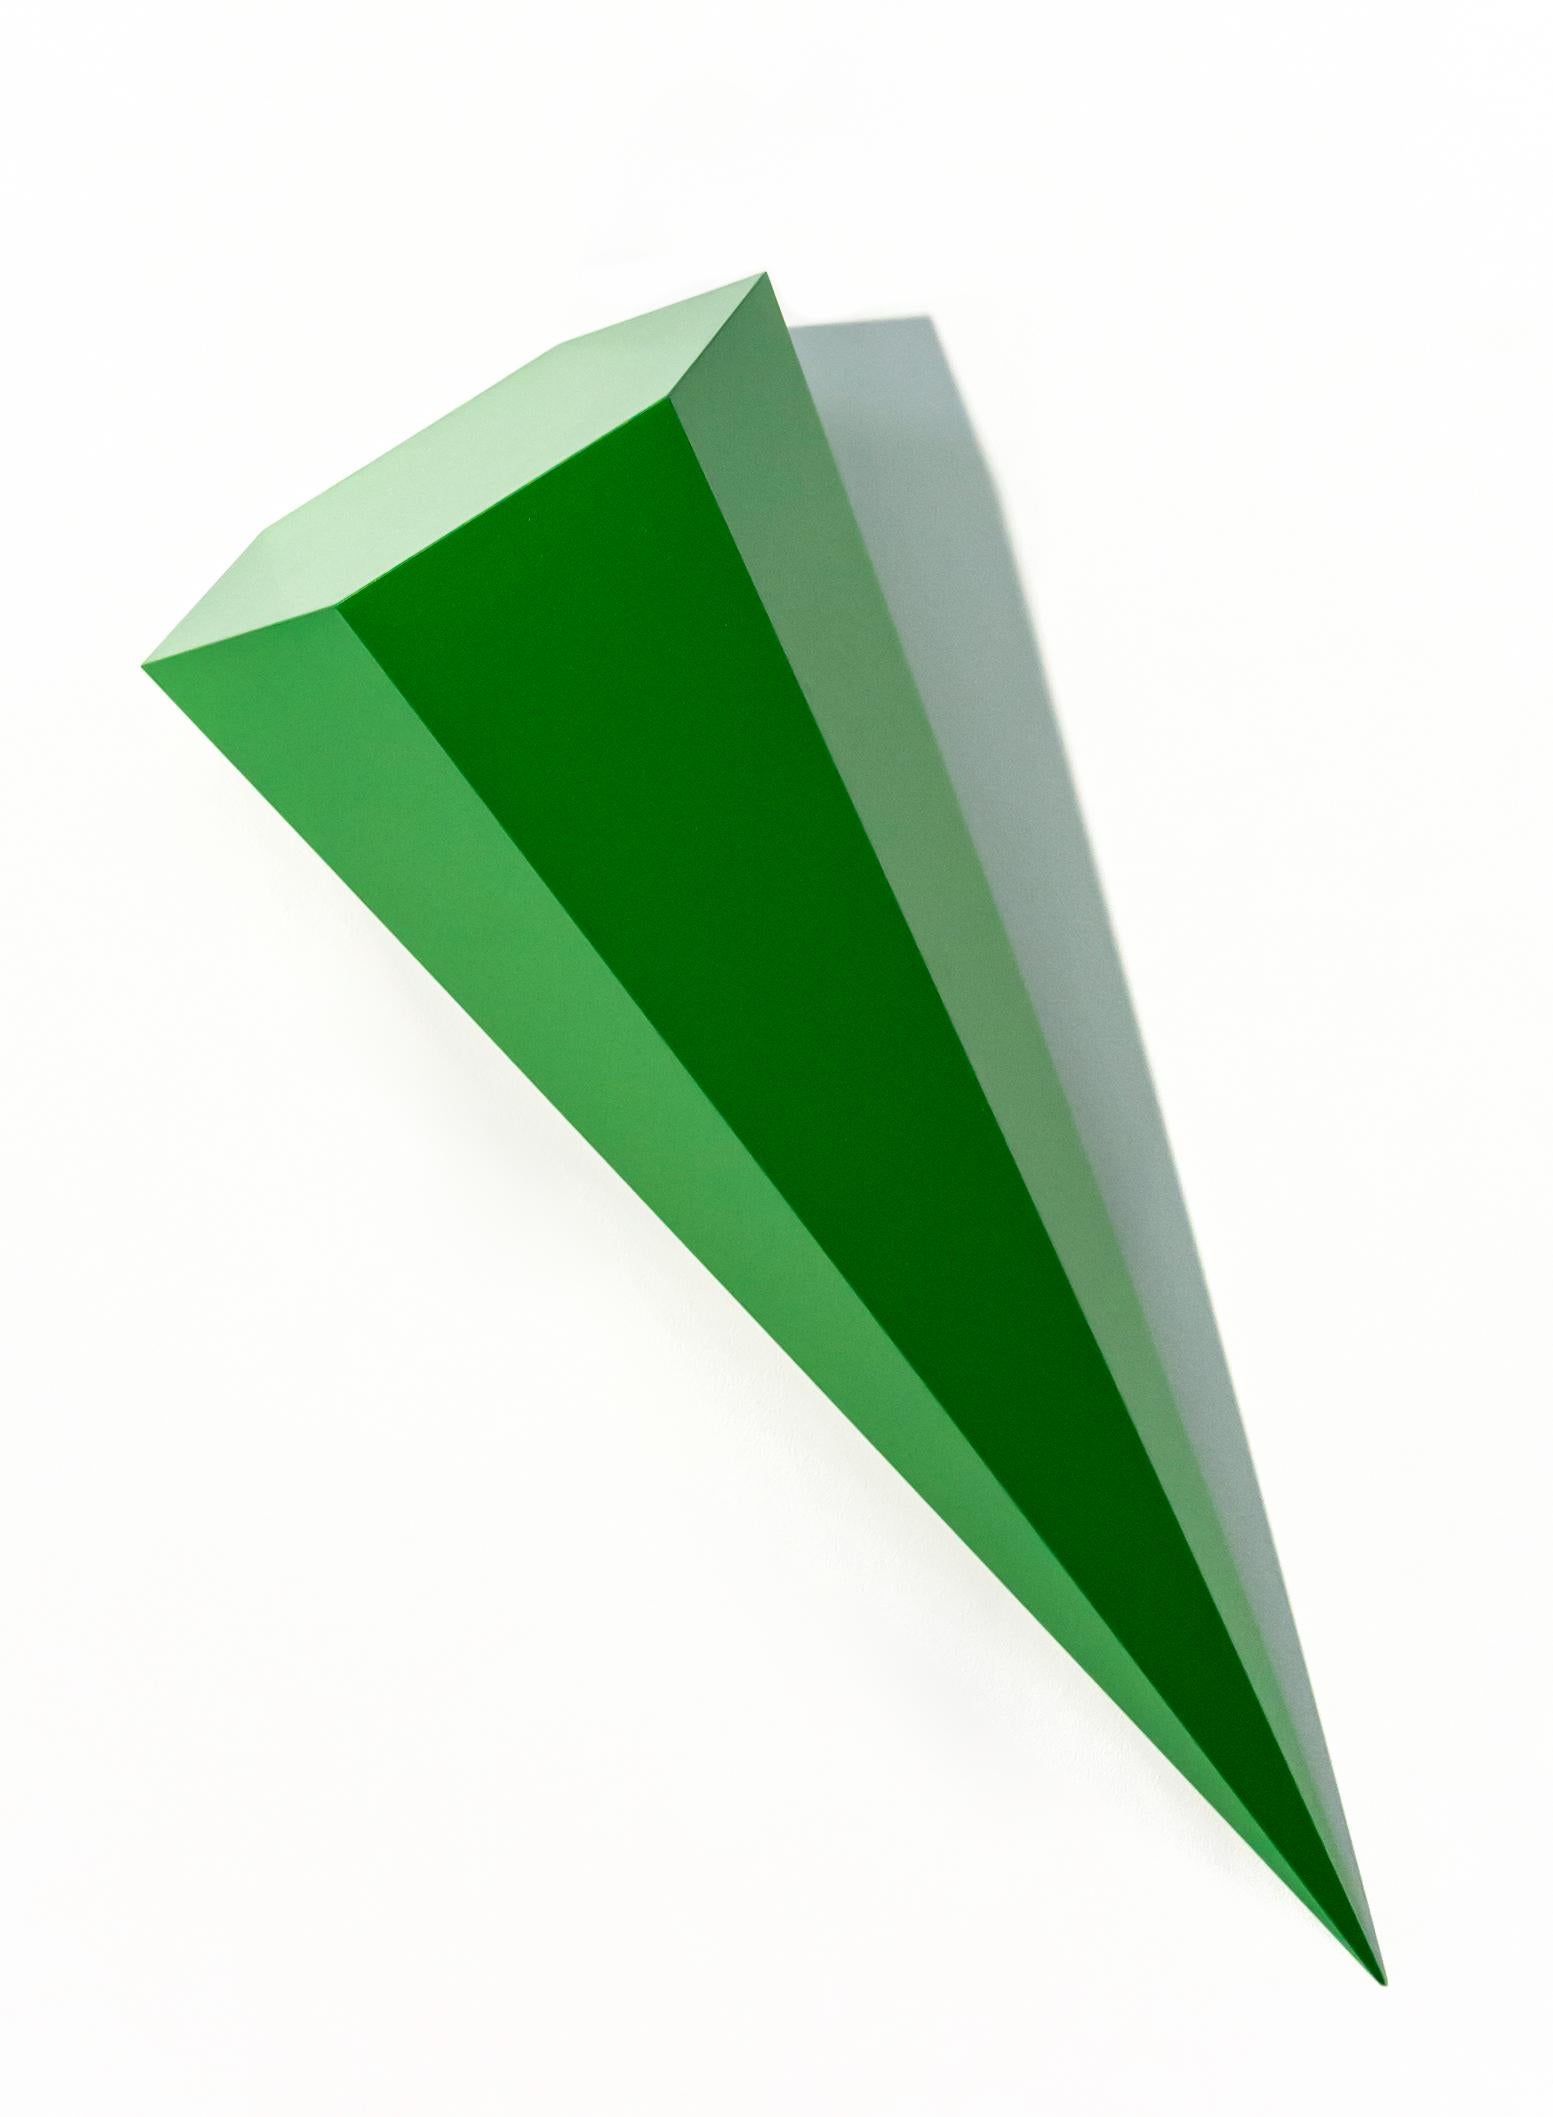 Lori Cozen-Geller Abstract Painting - On Point - bright, glossy, green, smooth surfaced, abstract, wall sculpture